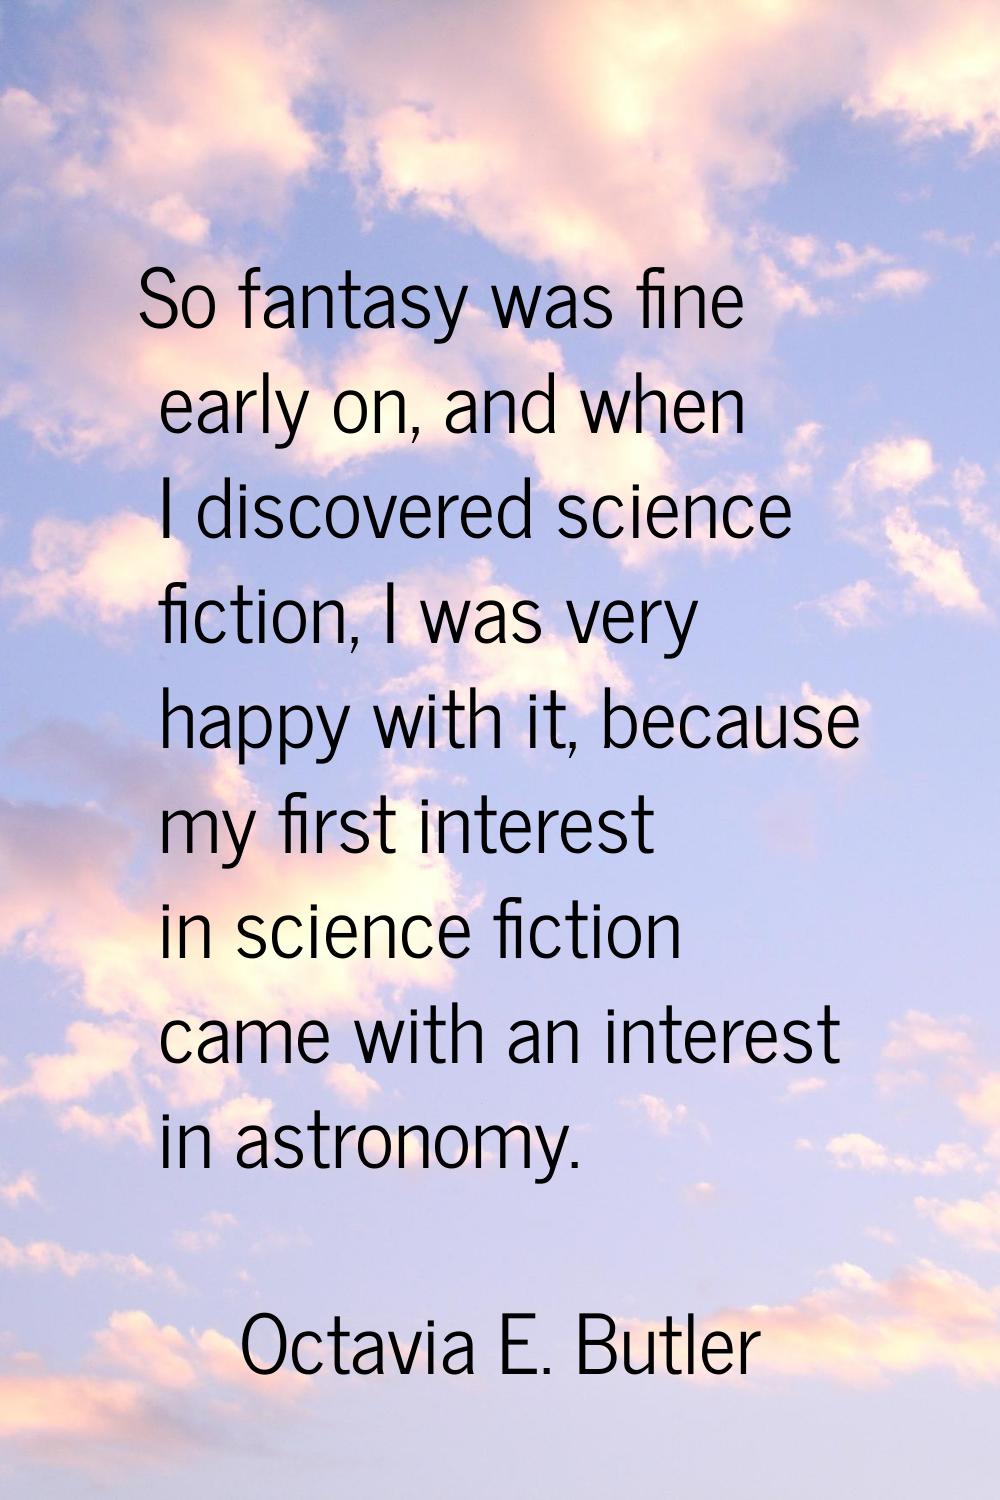 So fantasy was fine early on, and when I discovered science fiction, I was very happy with it, beca